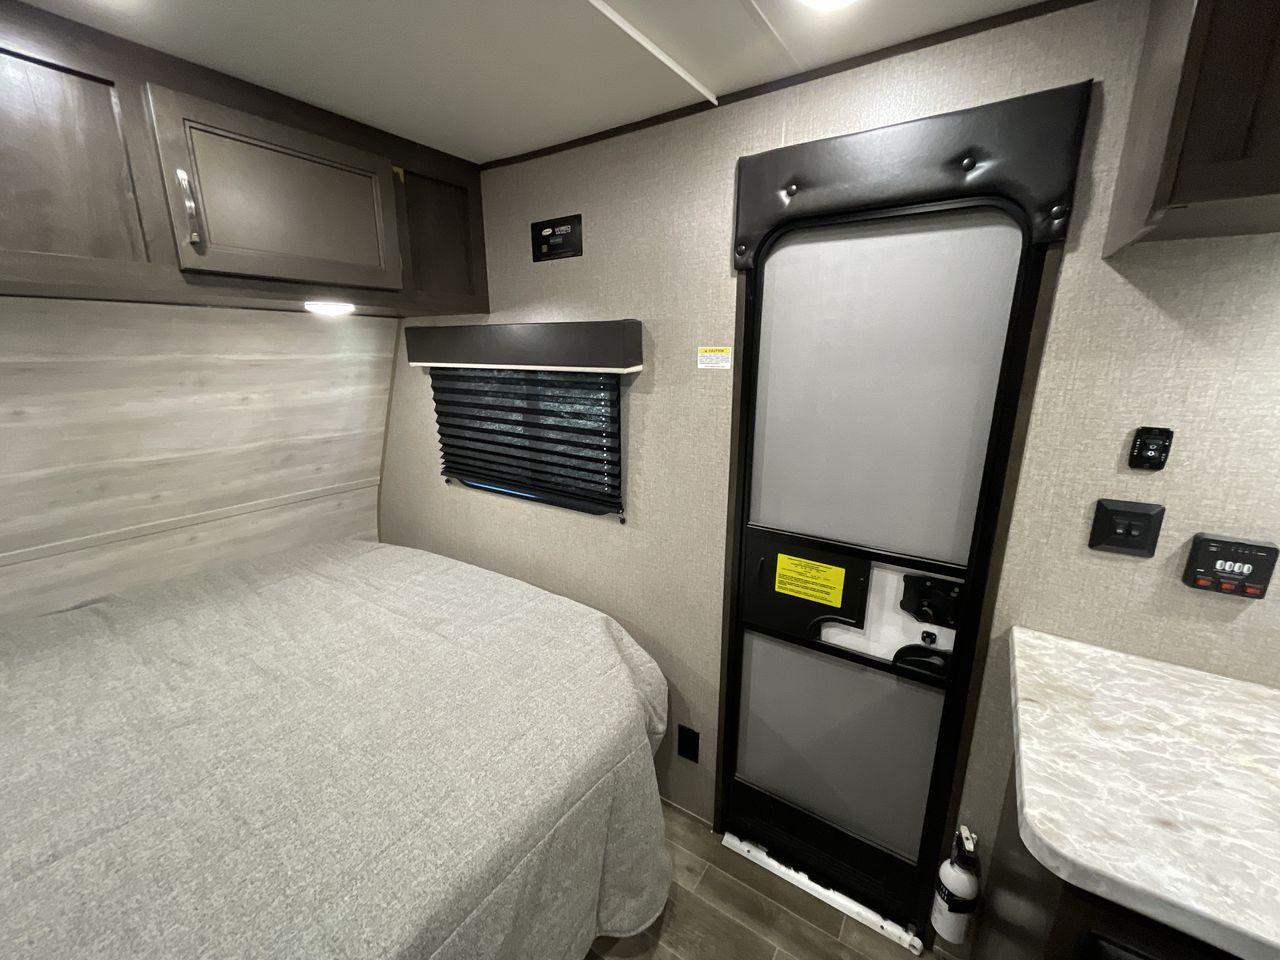 2021 JAYCO JAY FLIGHT SLX 174BH (1UJBJ0AJ1M1) , Length: 21.67 ft | Dry Weight: 3,075 lbs | GVWR: 3,950 lbs | Slides: 0 transmission, located at 4319 N Main St, Cleburne, TX, 76033, (817) 678-5133, 32.385960, -97.391212 - Take the 2021 Jayco Jay Flight SLX 174BH travel trailer out on your camping adventures. This lightweight and small RV is ideal for people looking for an affordable and cozy way to enjoy the great outdoors. The dimensions of this unit are 21.67 ft in length, 7.08 ft in width, and 9.17 ft in height. I - Photo #17